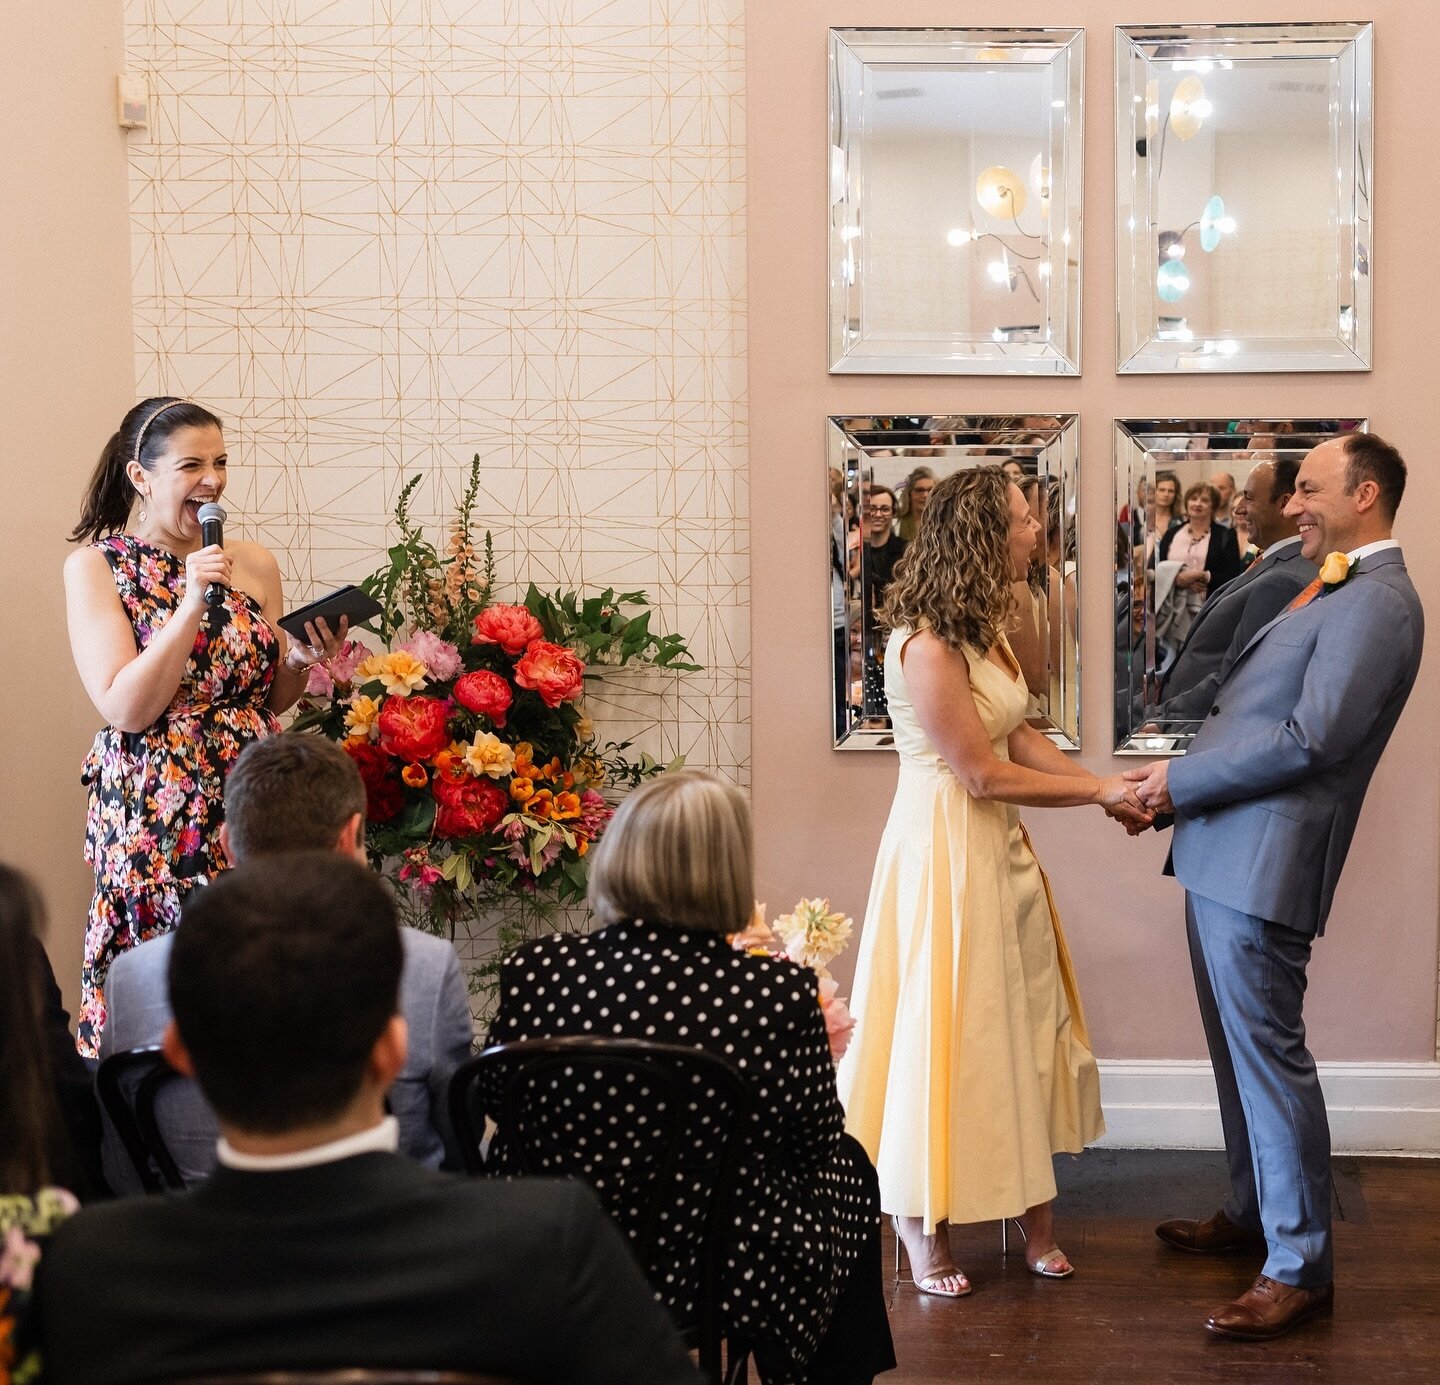 Do you want to know a secret? 

You don&rsquo;t have to &lsquo;endure&rsquo; your ceremony, just to get to the &lsquo;fun&rsquo; part of the day. 

Your ceremony should set the tone for your celebration - right from the very start.

I don&rsquo;t rec